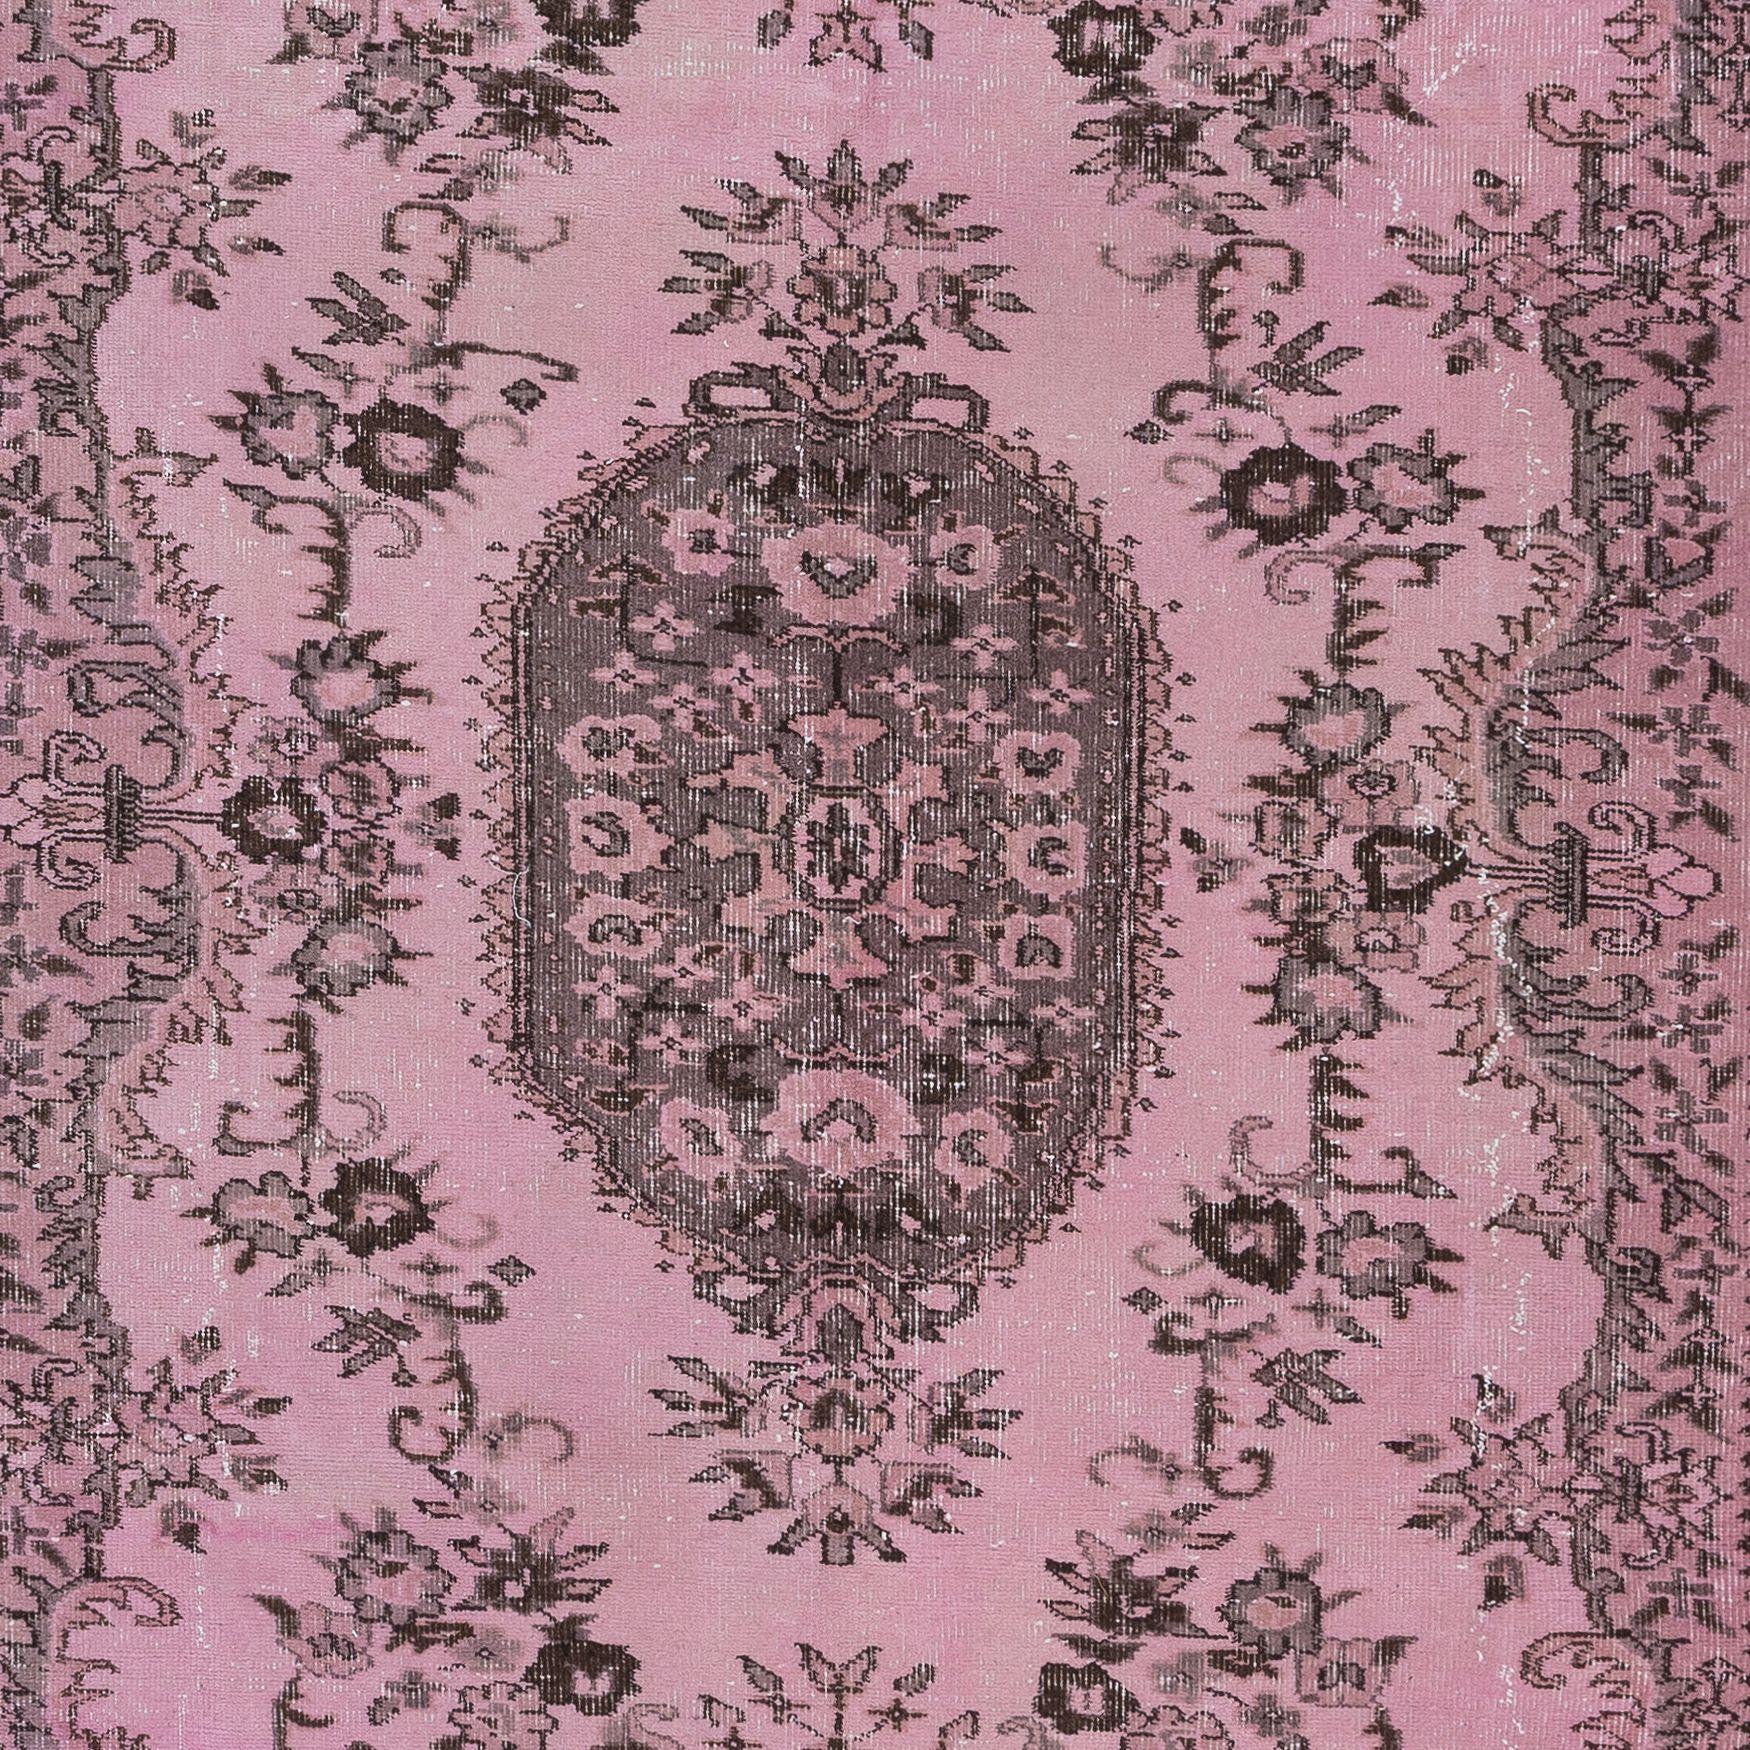 Hand-Knotted 5.6x8.6 Ft Pink Area Rug for Modern Interior, Handmade Turkish Decorative Carpet